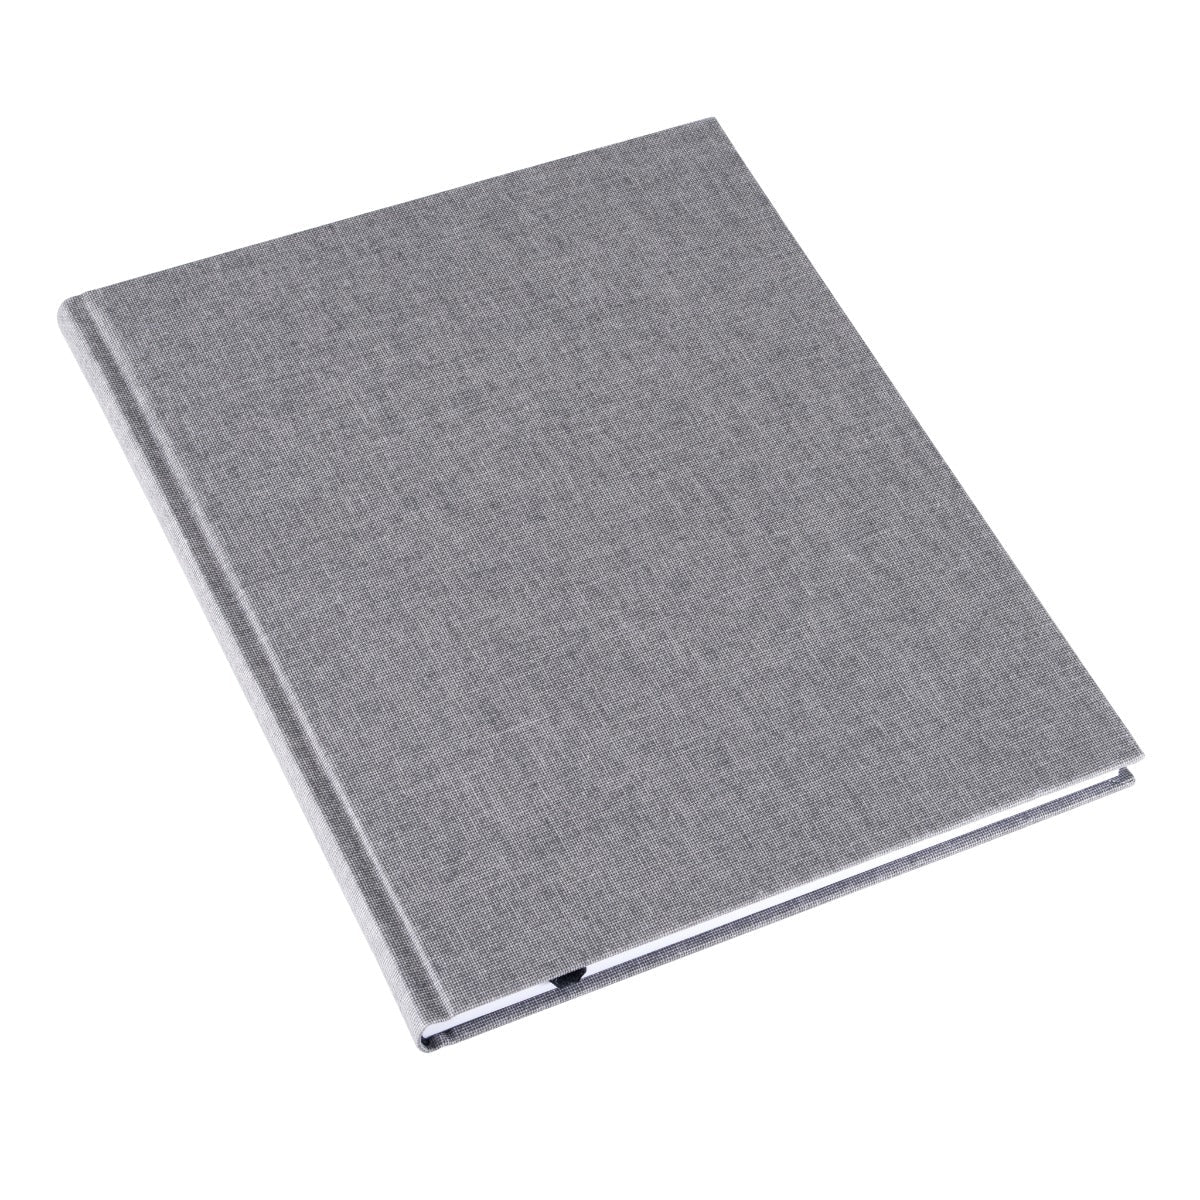 Bookbinders Notebook A4 - Record light grey